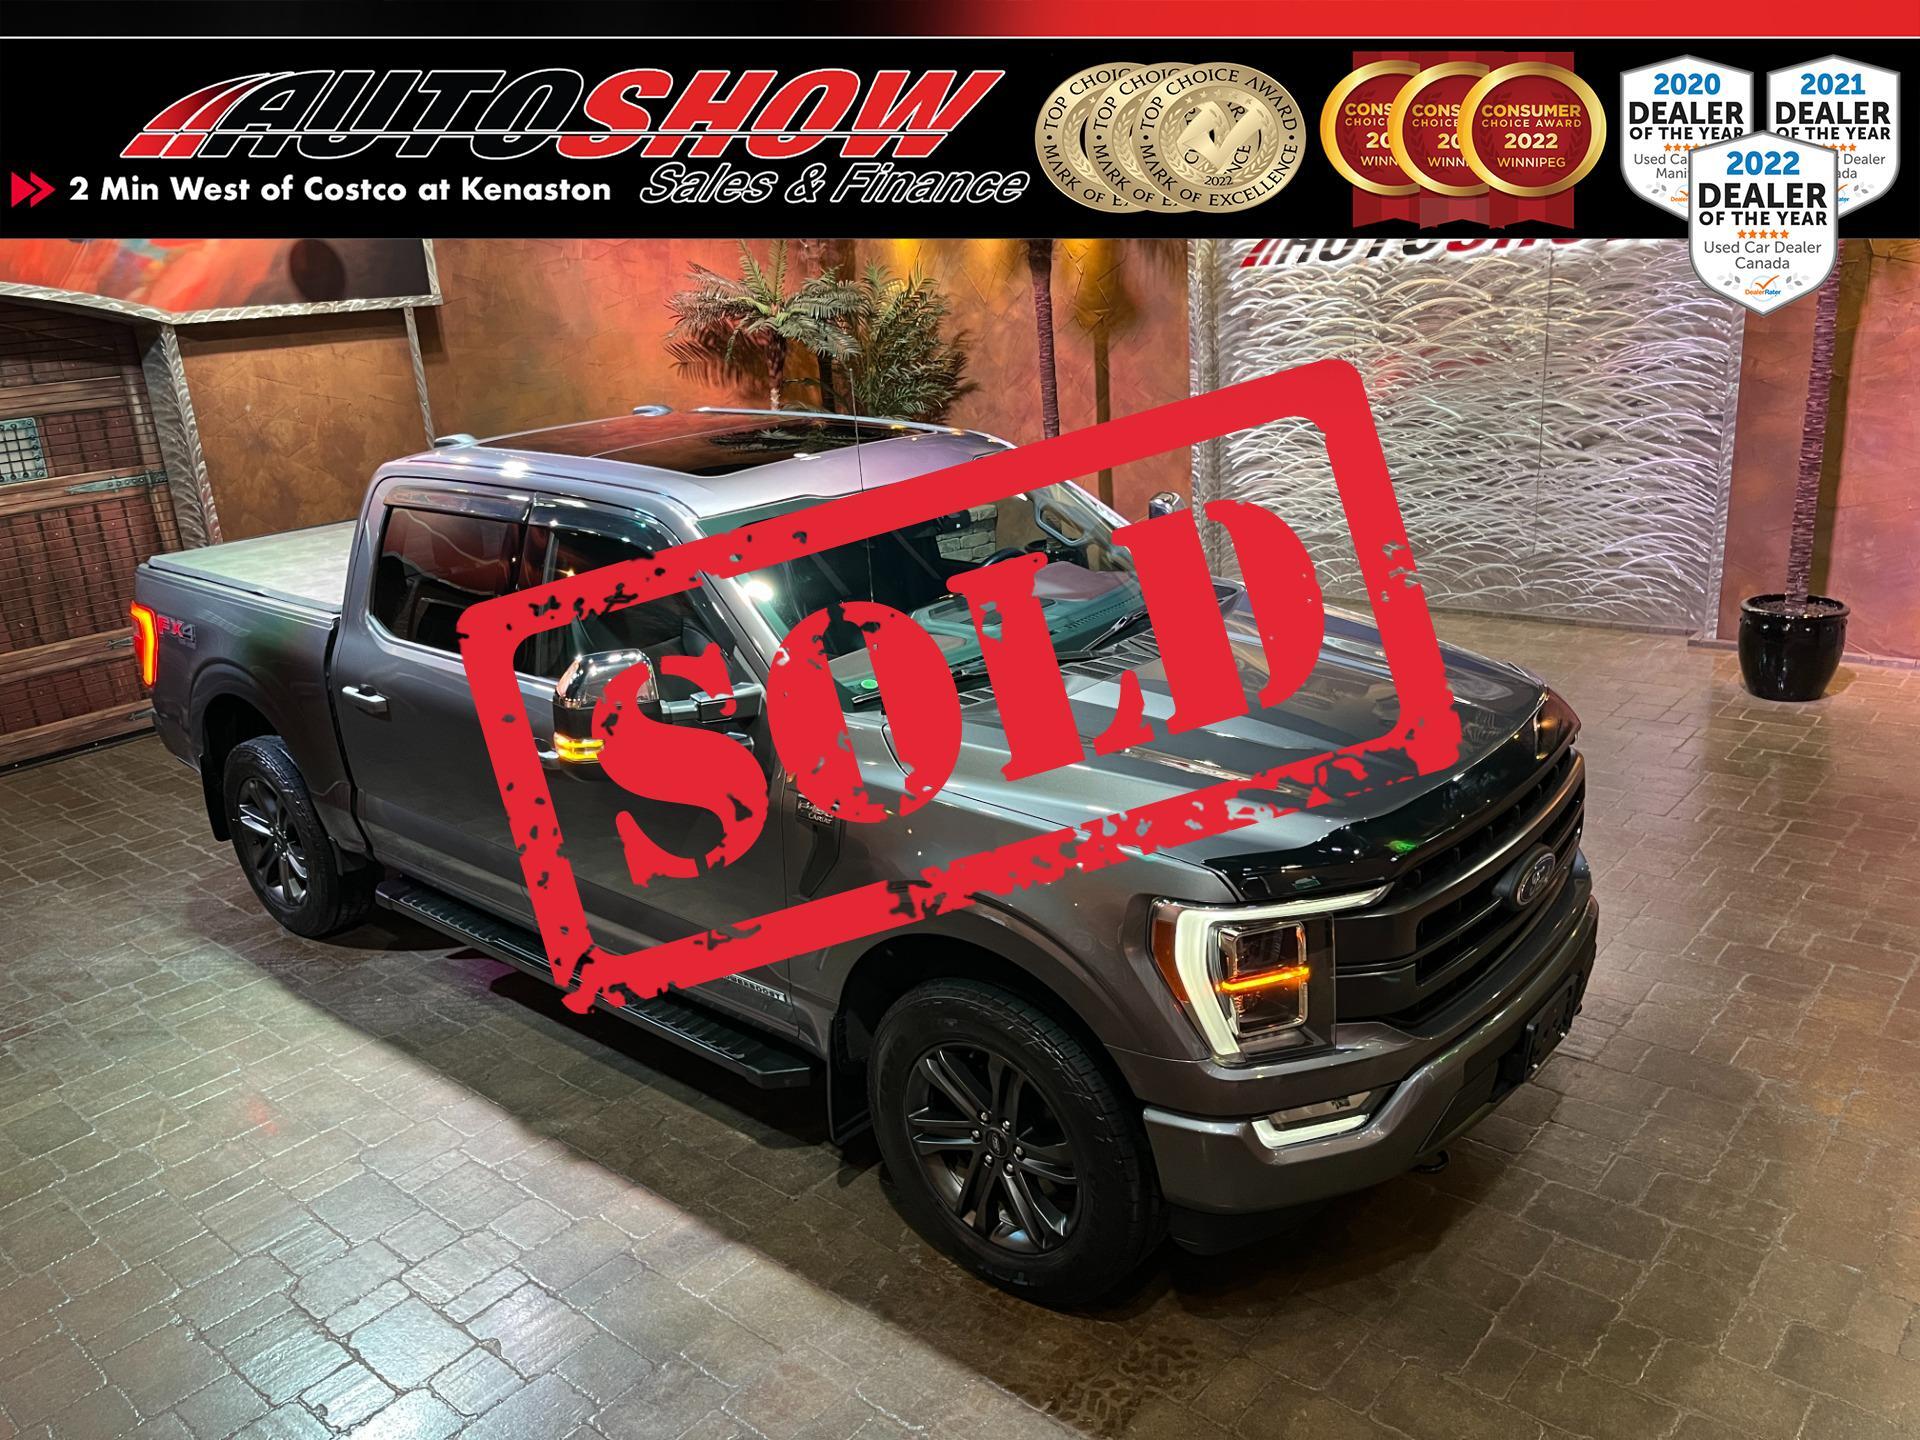 2021 Ford F-150 Lariat FX4 Powerboost - Pano Rf, Htd/Cooled Lthr, 